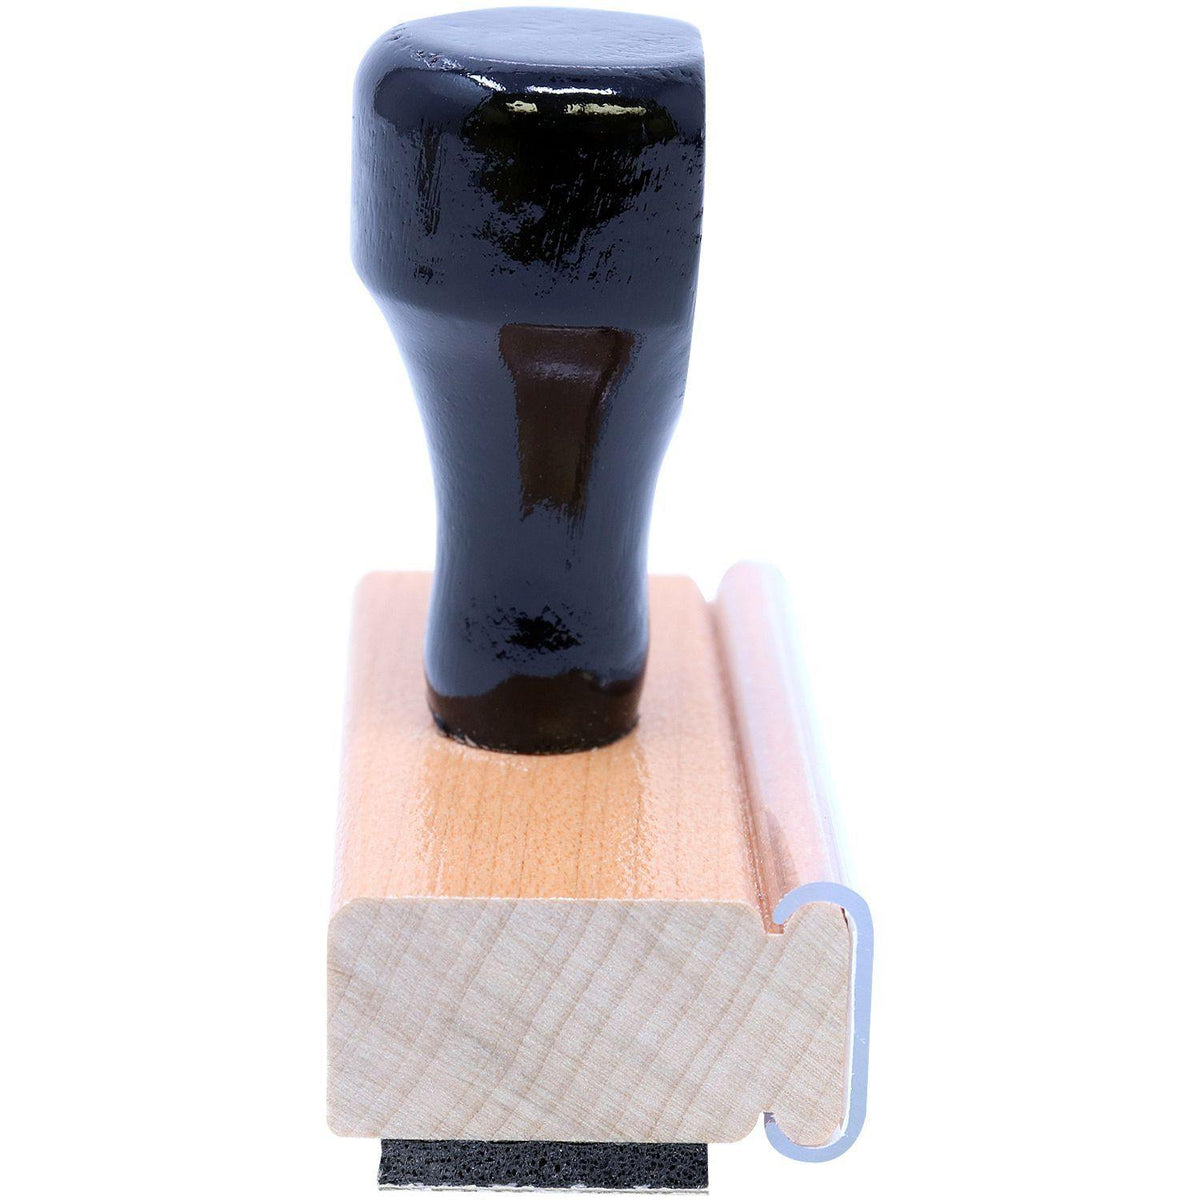 Narrow Font Court Copy Rubber Stamp - Engineer Seal Stamps - Brand_Acorn, Impression Size_Small, Stamp Type_Regular Stamp, Type of Use_Legal, Type of Use_Office